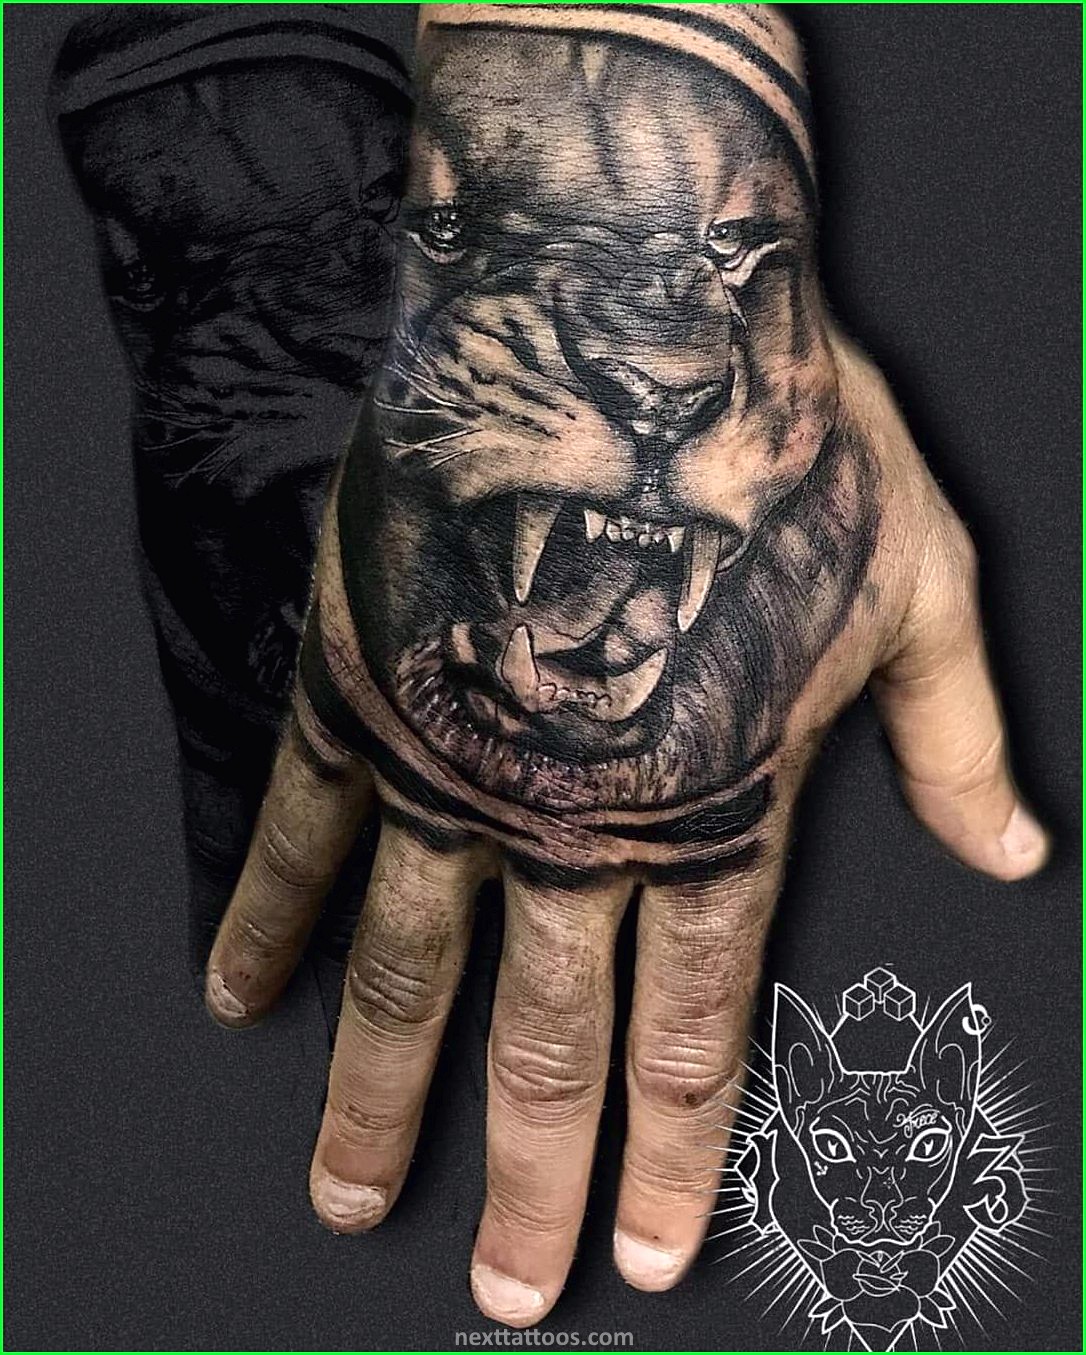 How to Choose the Best Animal Hand Tattoos